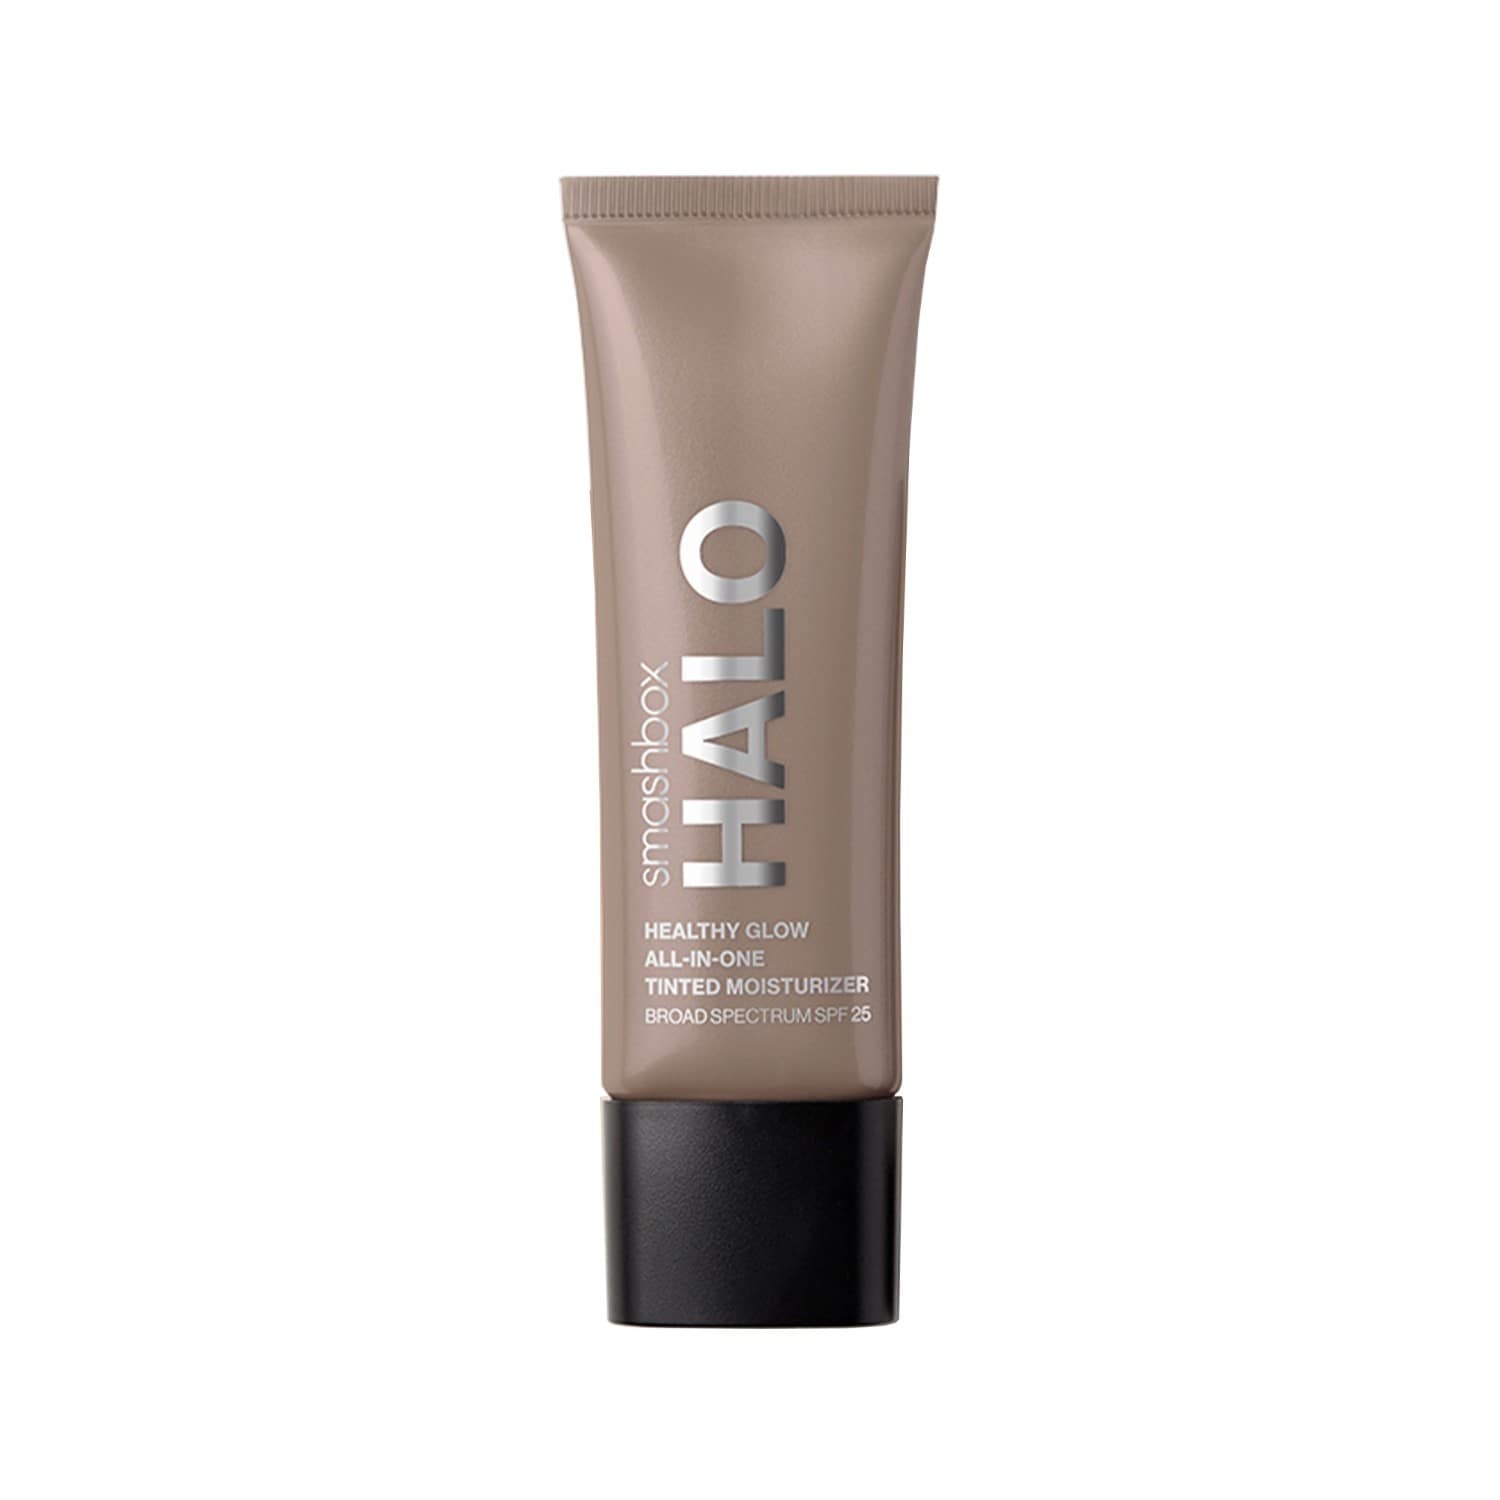 Smashbox Halo Healthy Glow All-in-One Tinted Moisturizer, Tan Deep